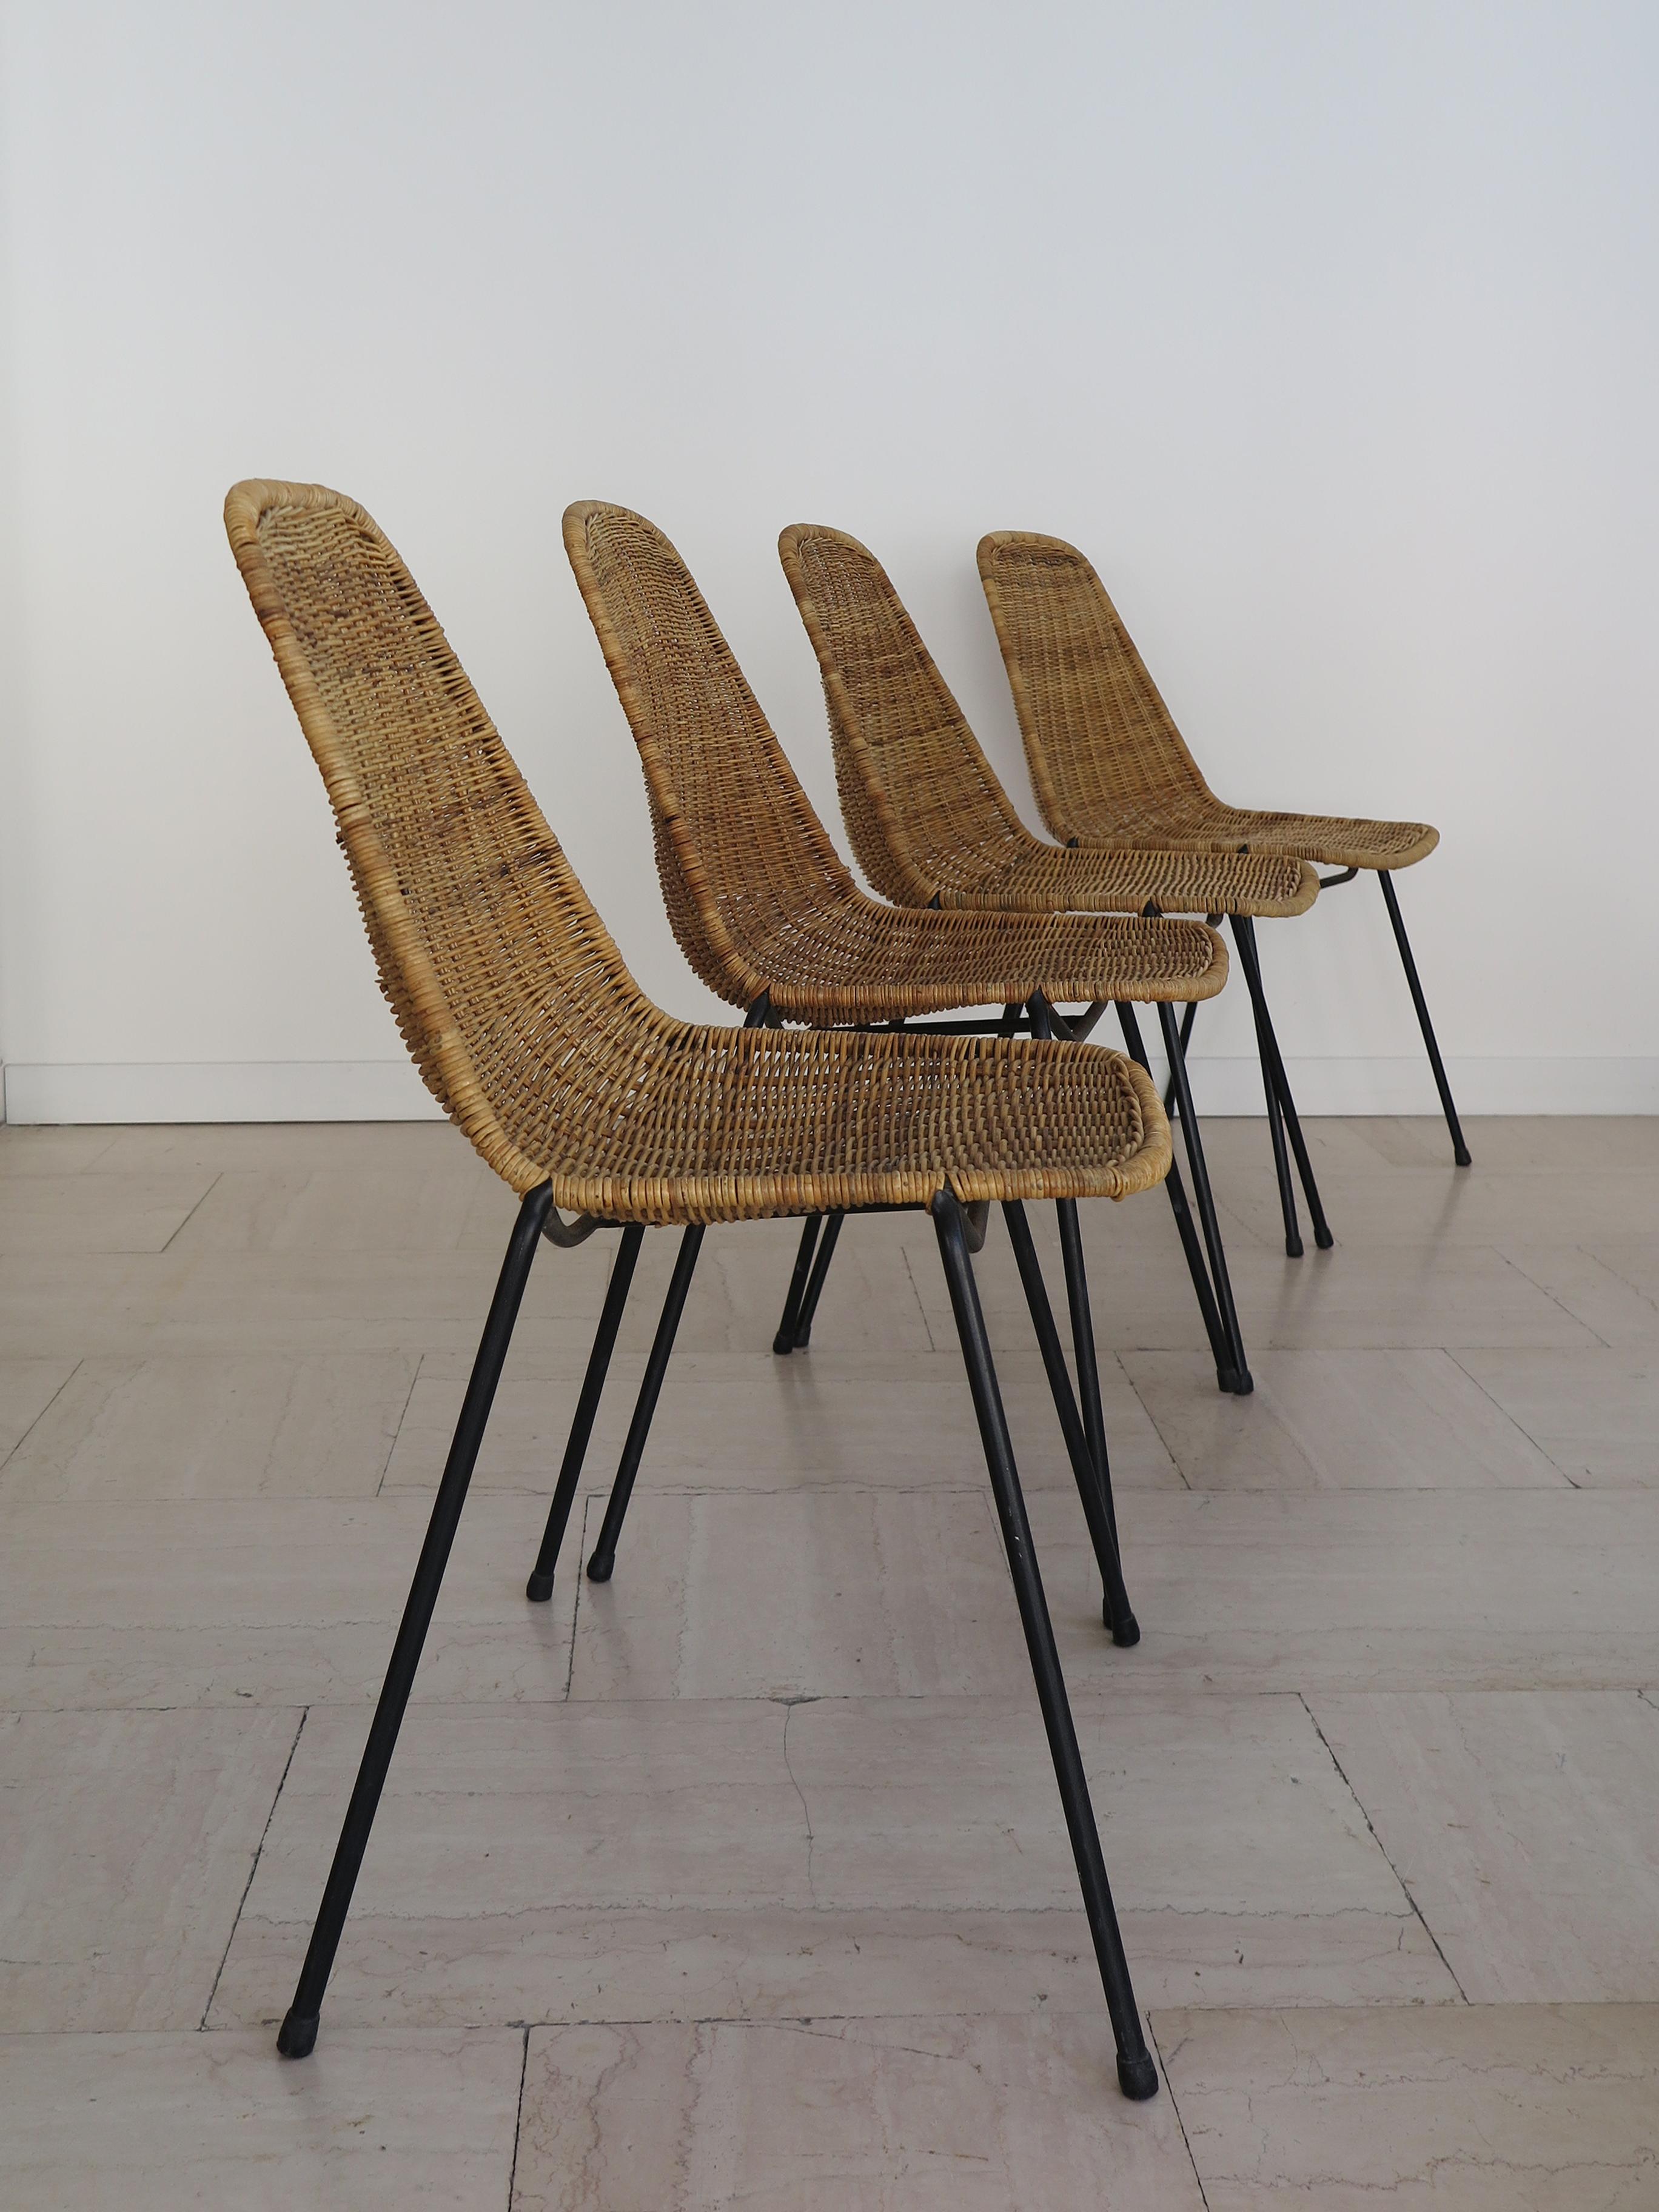 Mid-Century Modern Italian Midcentury Rattan Dining Chairs Design Campo & Graffi for Home, 1950s For Sale